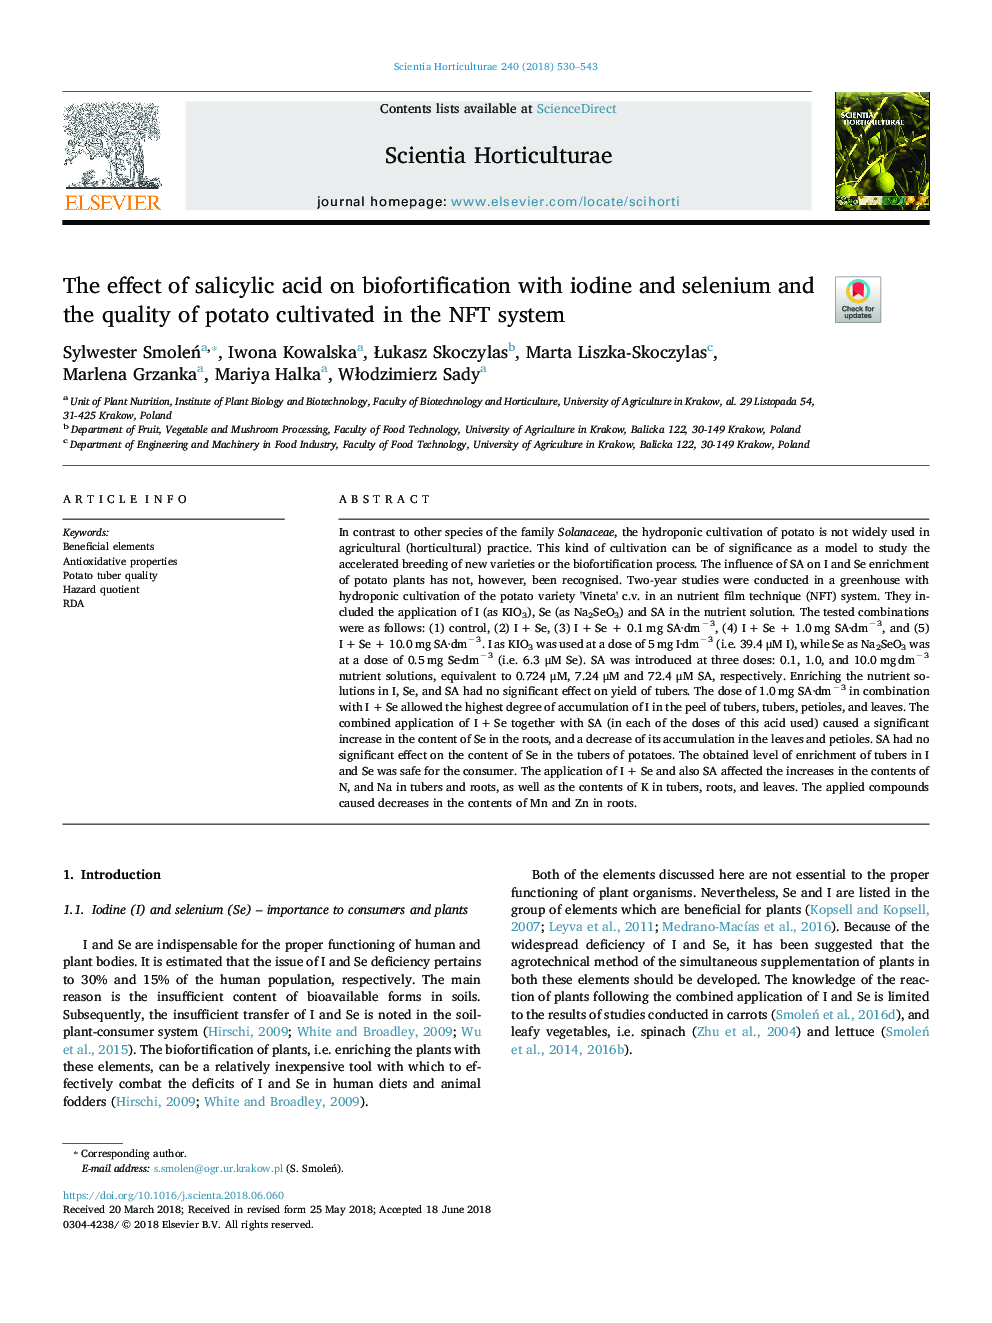 The effect of salicylic acid on biofortification with iodine and selenium and the quality of potato cultivated in the NFT system